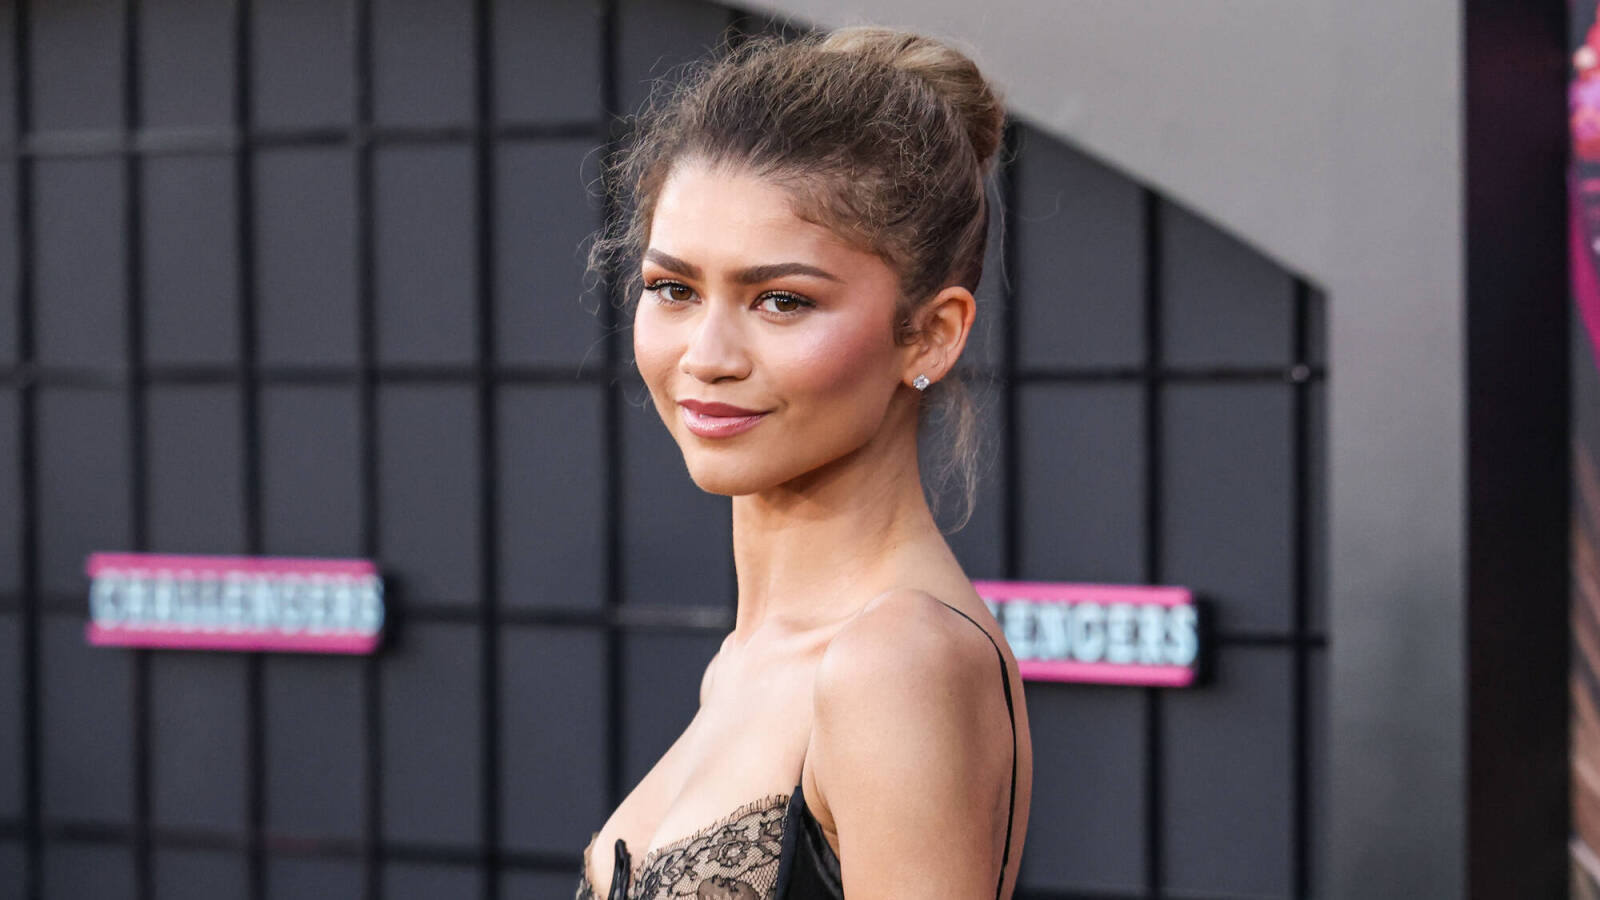 Watch: Zendaya pays tribute to WTA legends Venus and Serena Williams as she recreates their iconic Vogue cover look on the Challengers PR tour finale